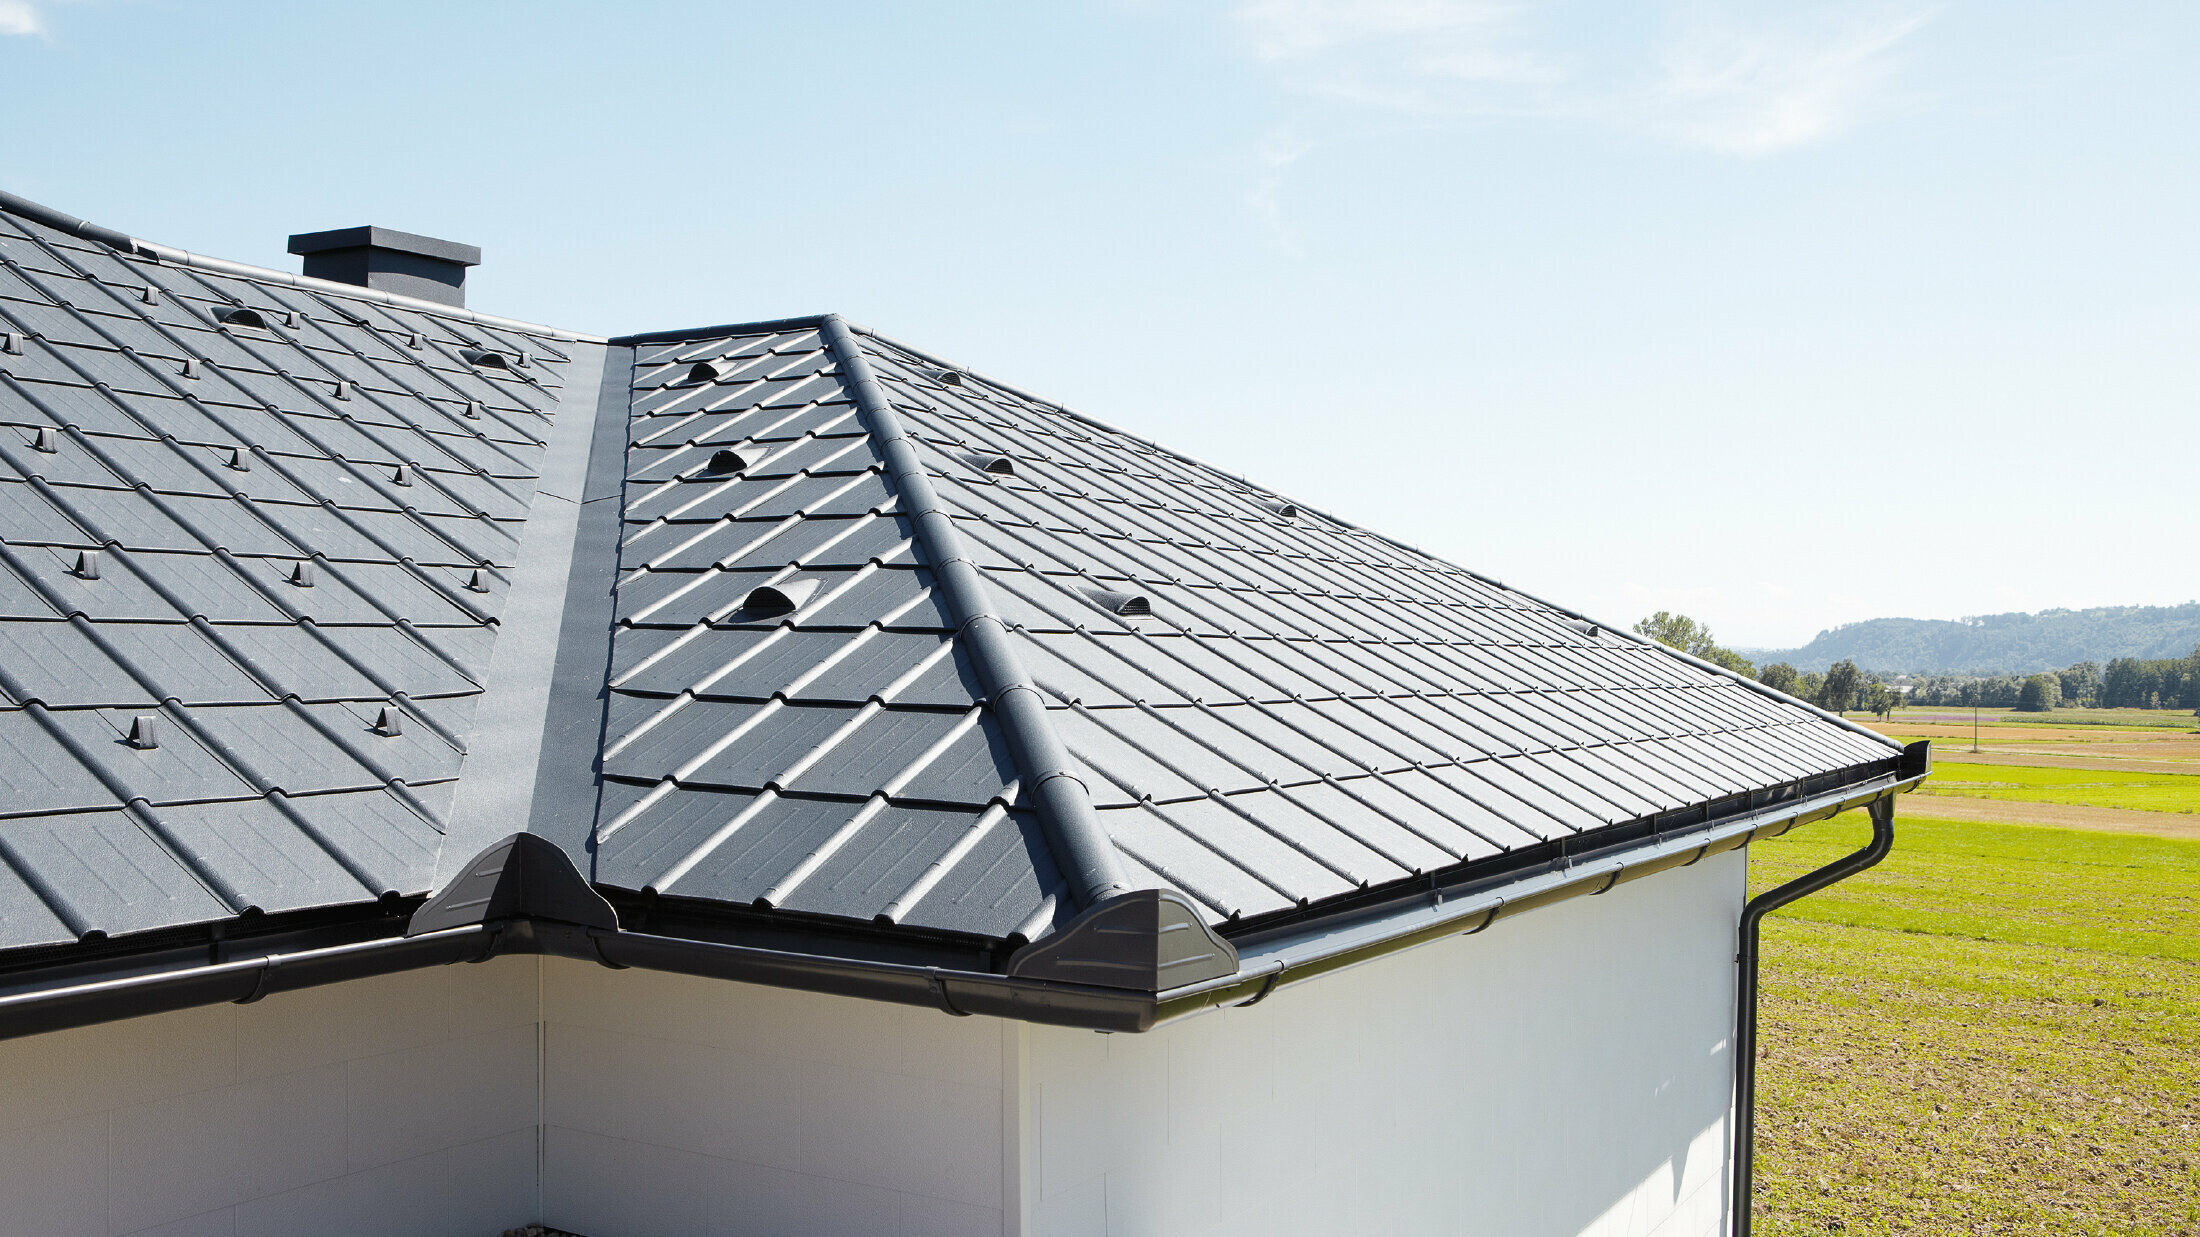 Detached bungalow, the roof is covered with PREFA roof tiles and the gutter in anthracite, you can also see a valley